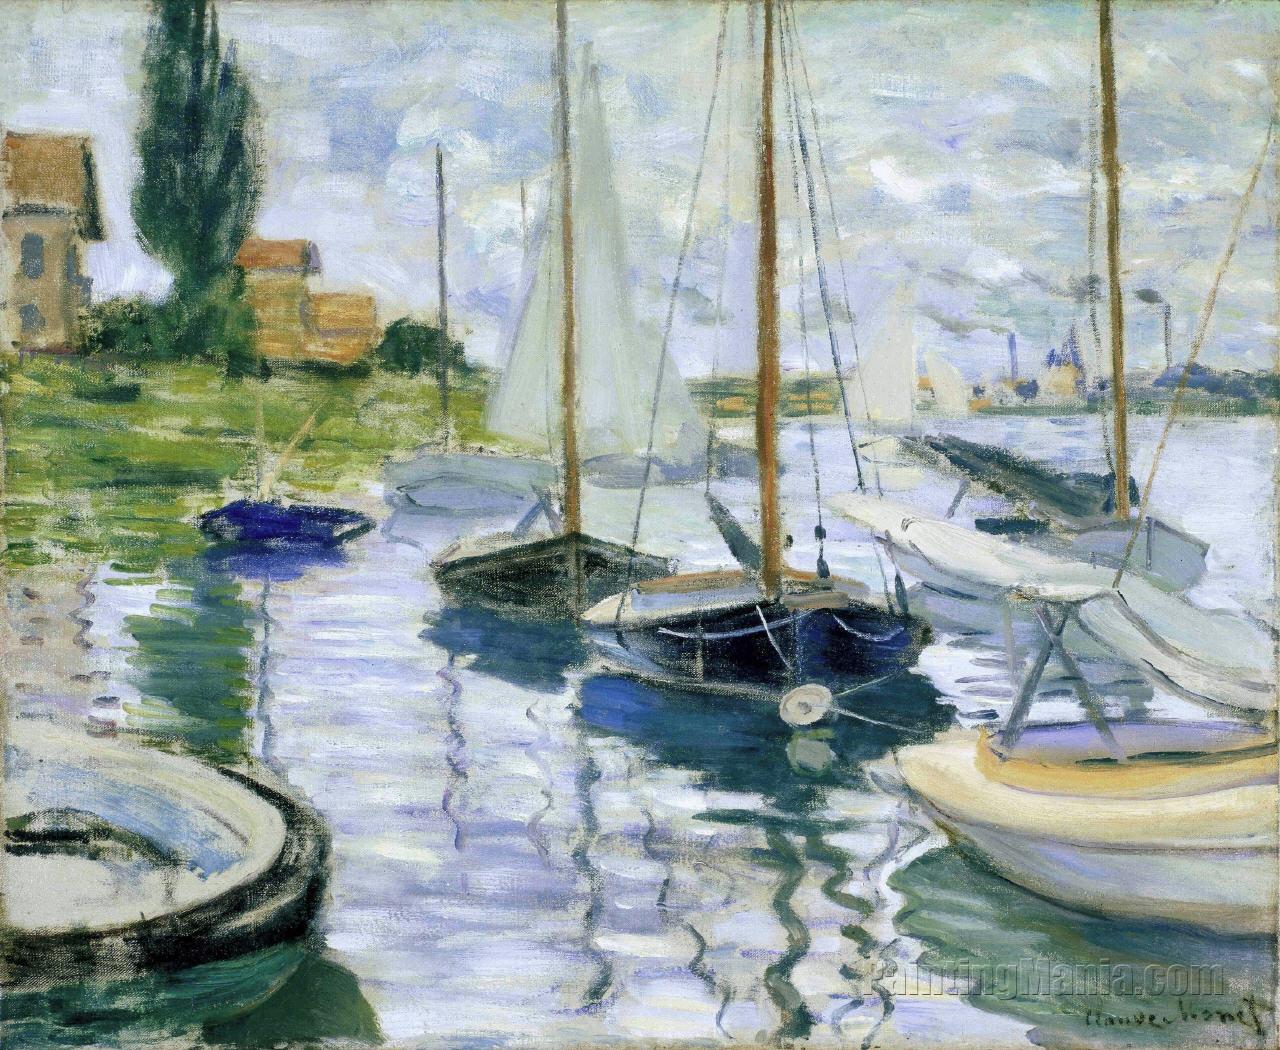 Boats at rest, Petit-Gennevilliers